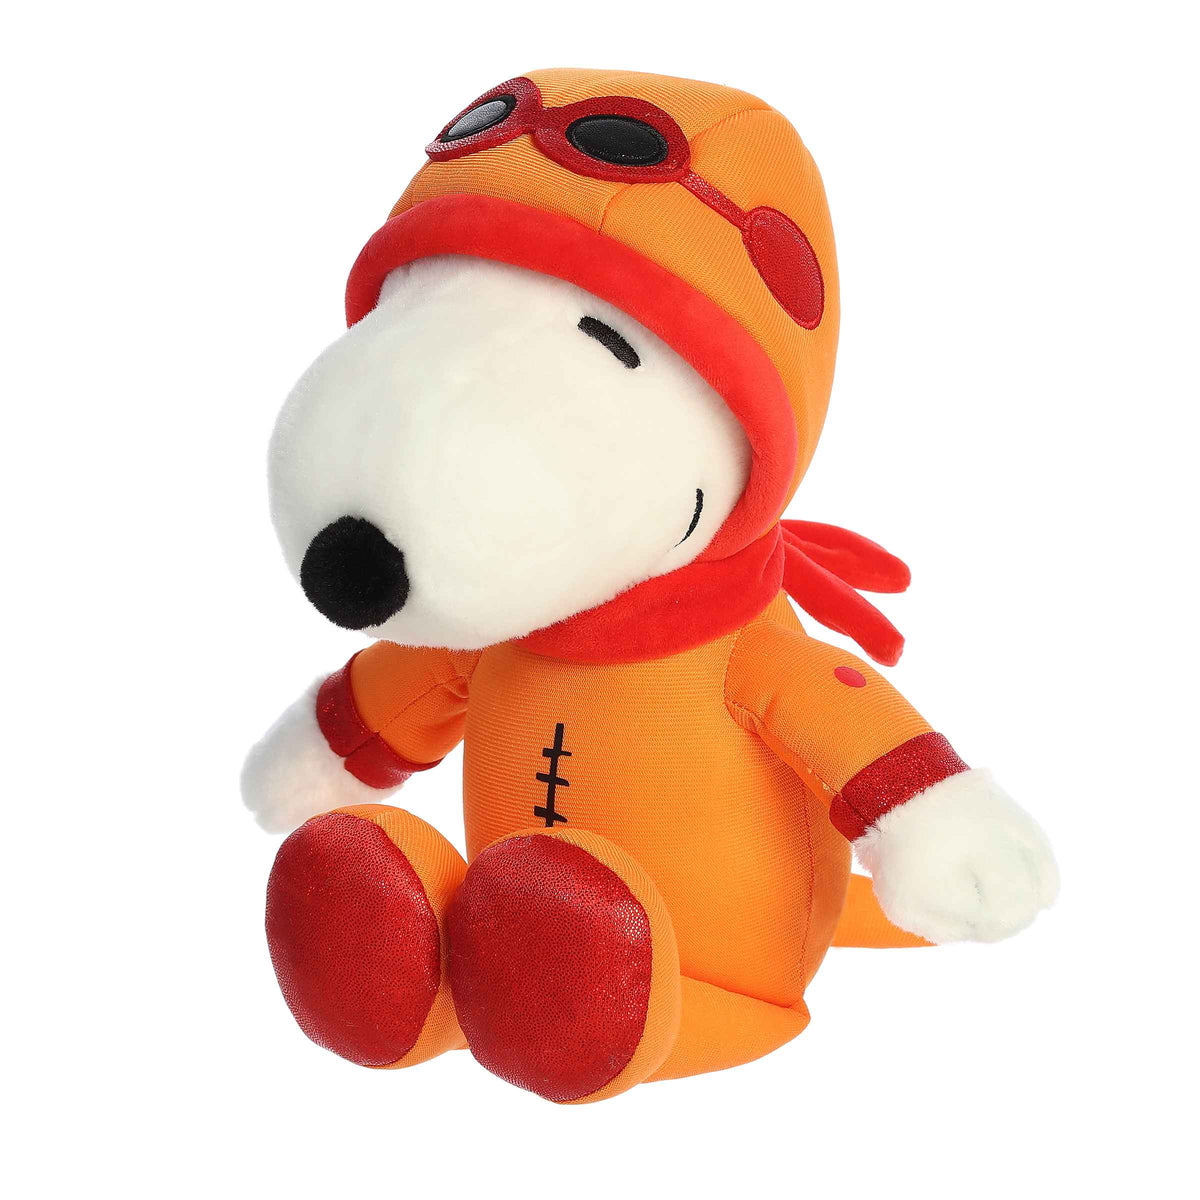 Astronaut Snoopy plush by Aurora from the Peanuts plush collection, in a red space suit, Snoopy is ready for cosmic fun!